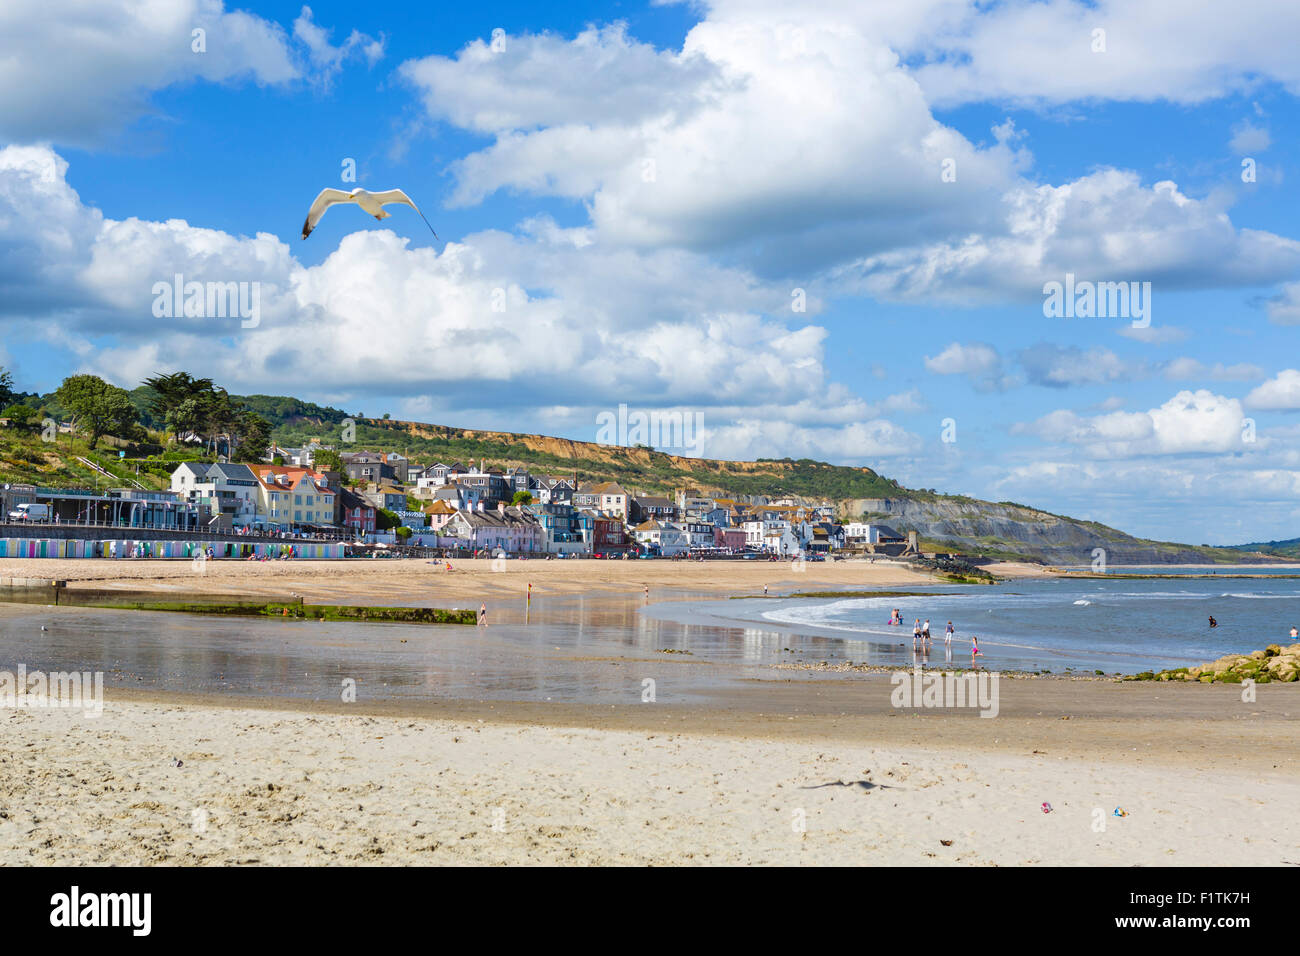 Seagull flying over the beach at low tide with the town behind, Lyme Regis, Lyme Bay, Jurassic Coast, Dorset, England, UK Stock Photo